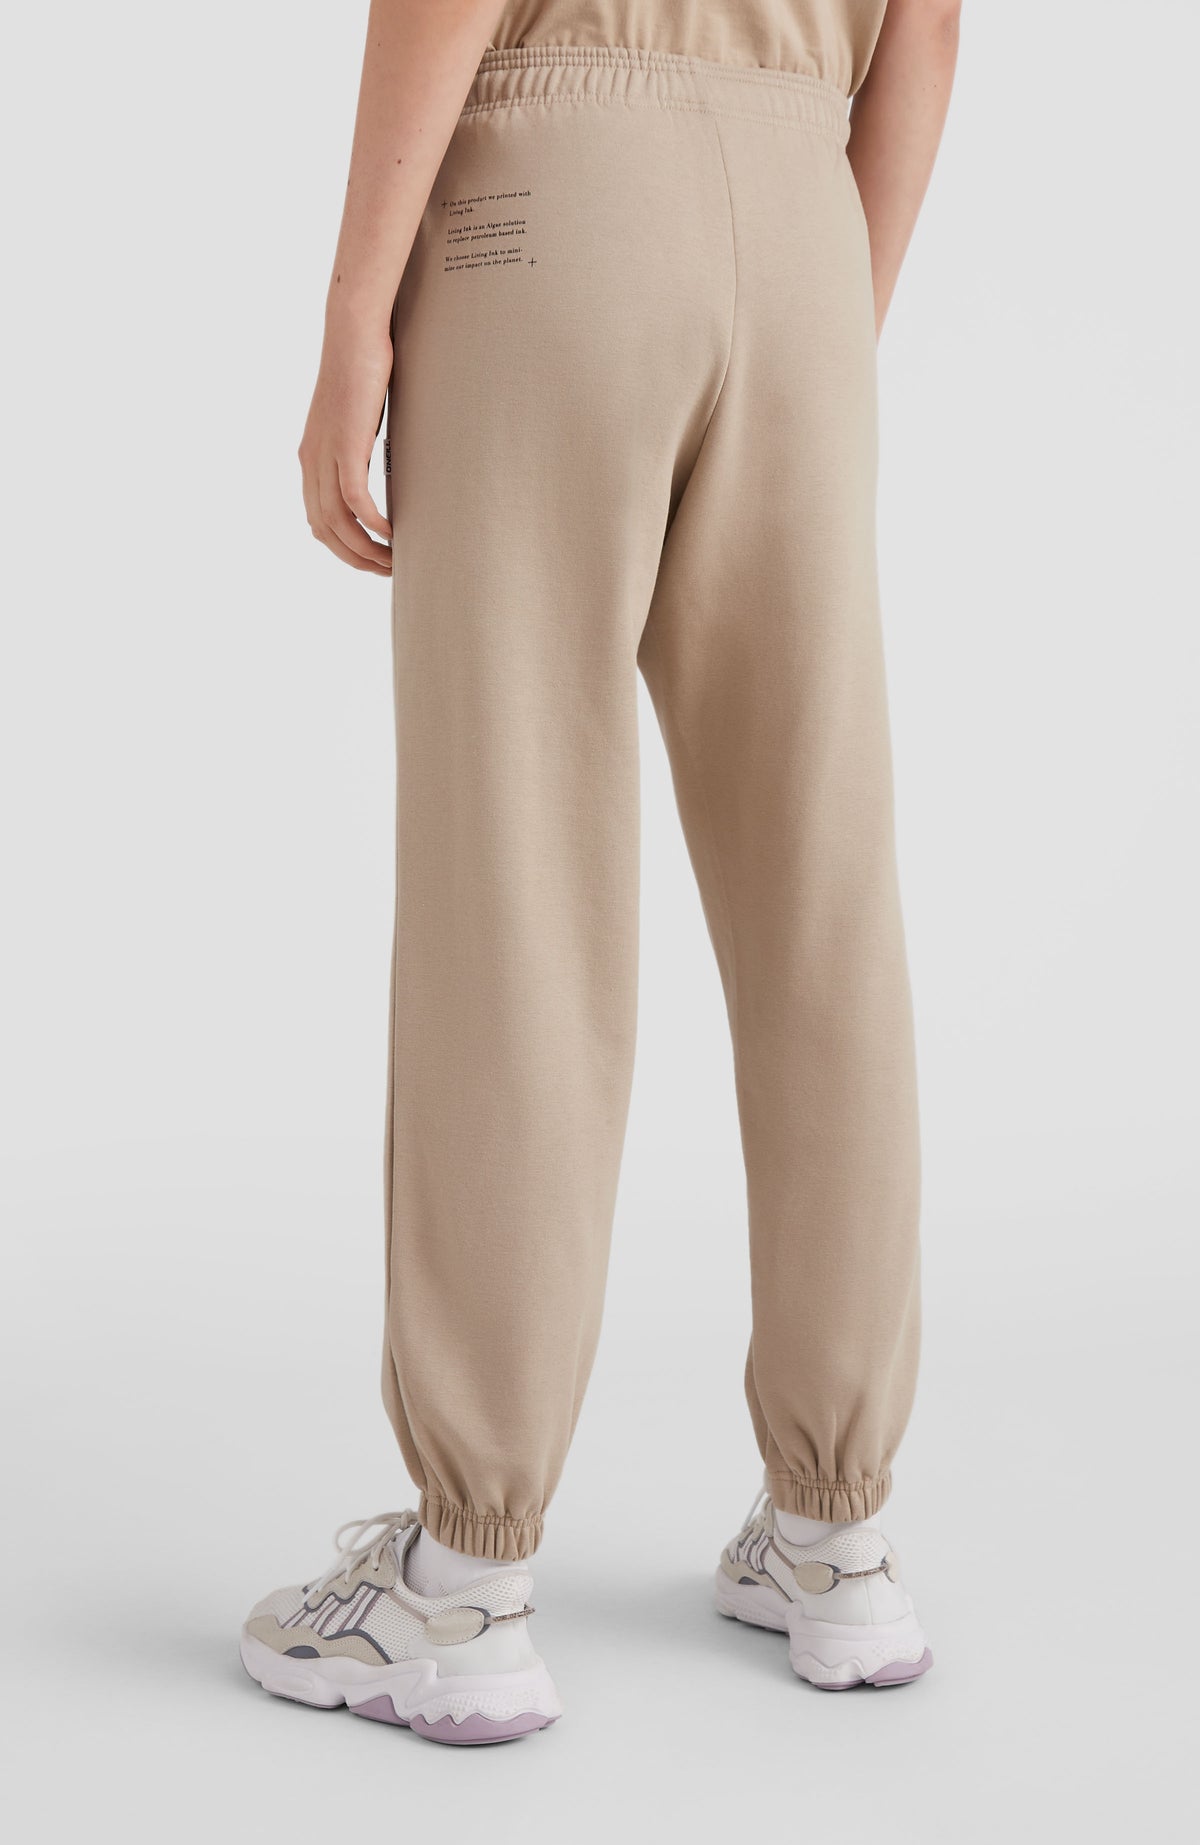 O'Neill SURF STATE JOGGER PANTS